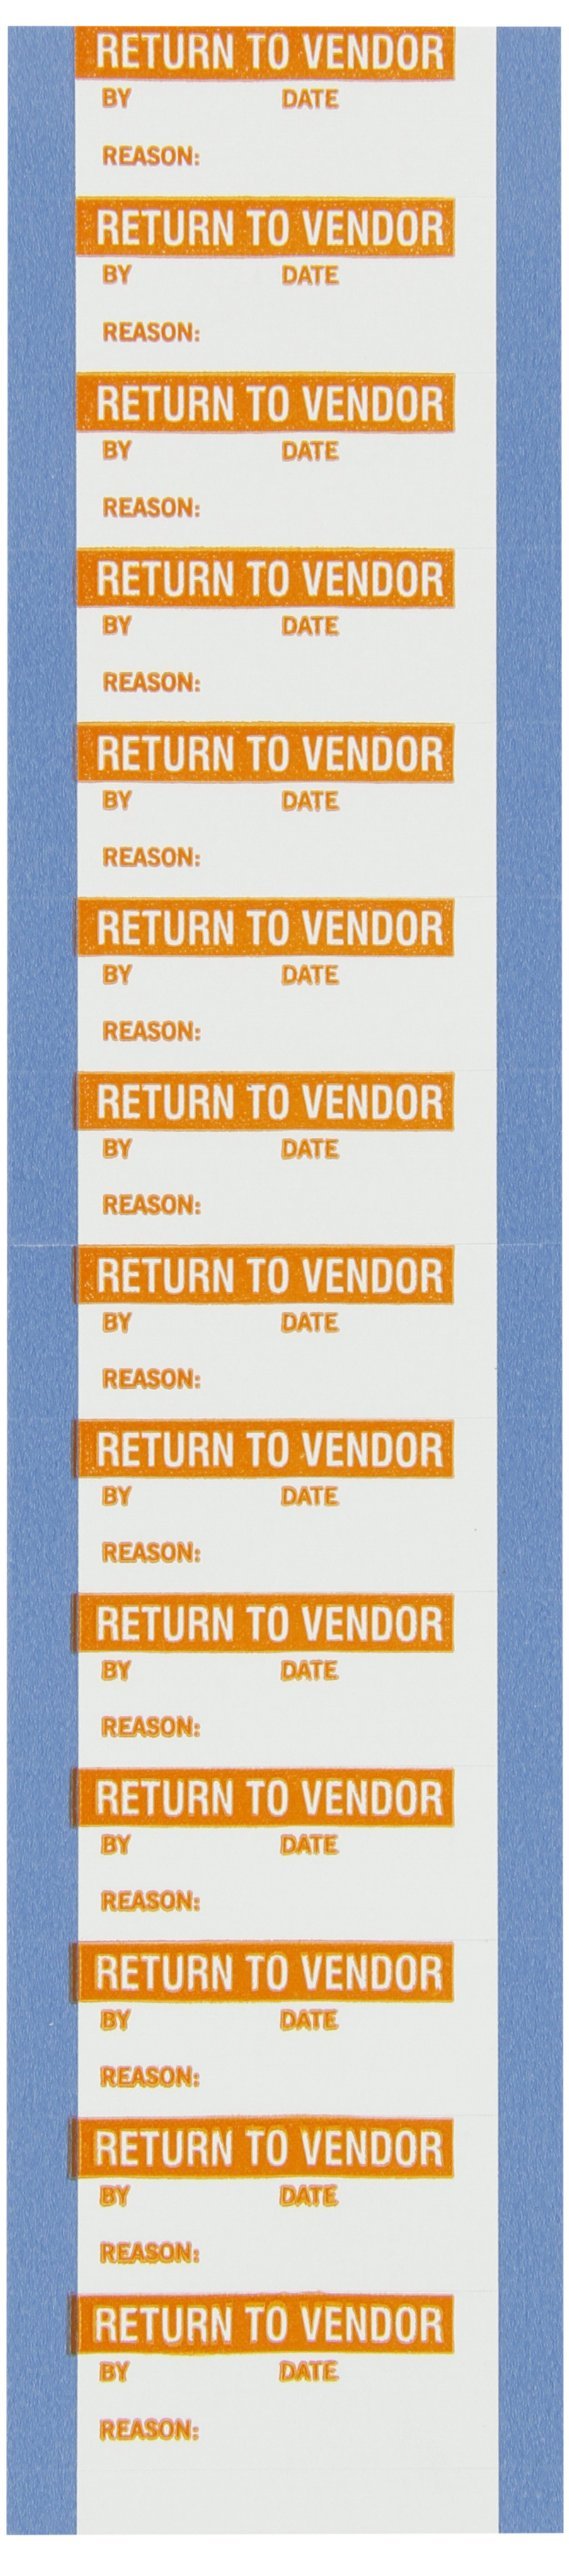 Brady WO-4 Repositionable Vinyl Cloth Quality Control Labels , Orange On White, 1.500" x 0.625" (38.100 Mm x 15.880 Mm), Legend "Return To Vendor" (14 Per Card, 1 Card Per Package)